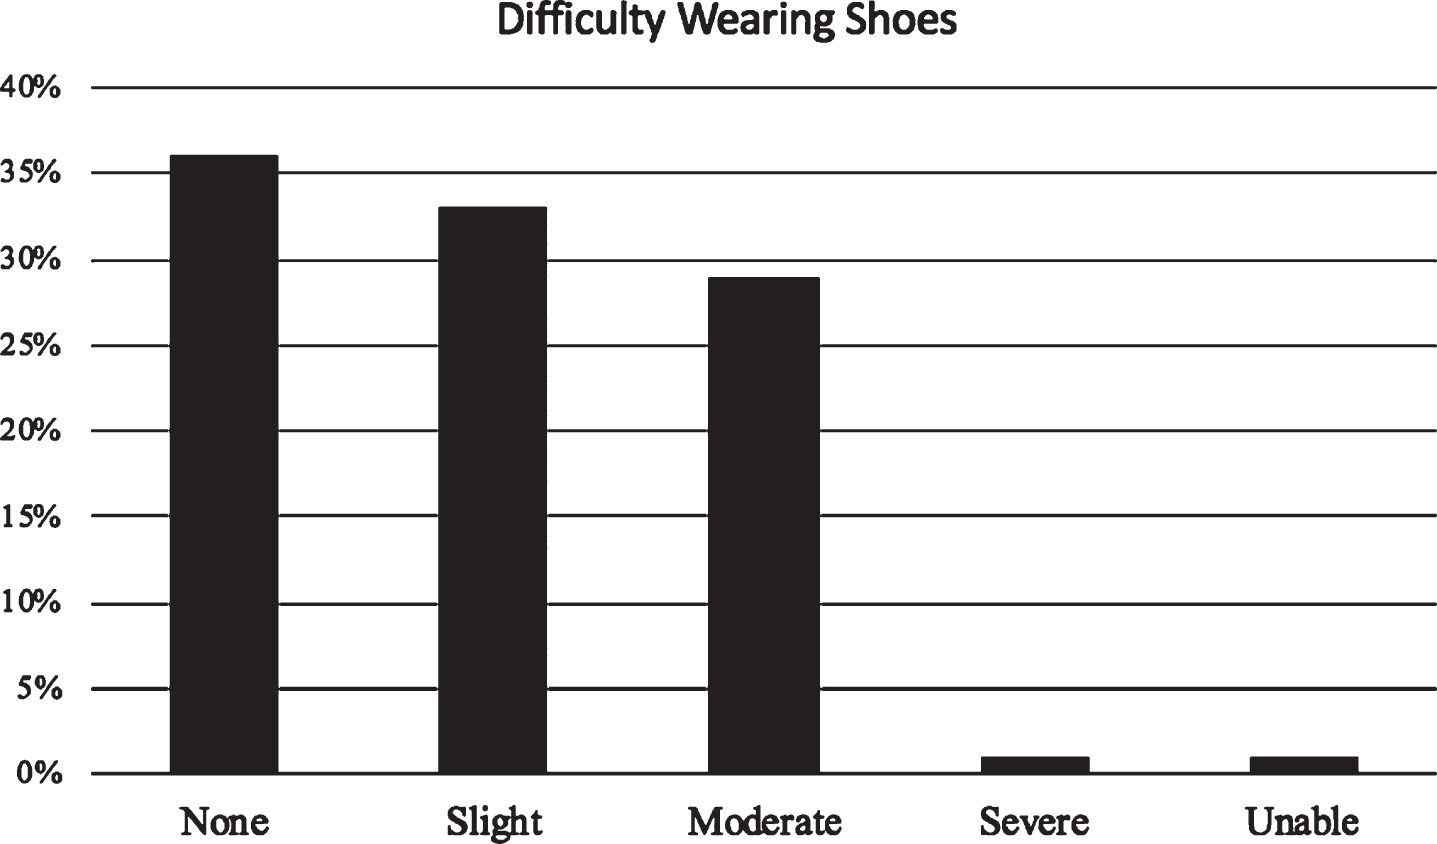 Frequency of difficulties with wearing shoes with level of severity. Study population responses to the degree of difficulty they associated with putting on shoes.